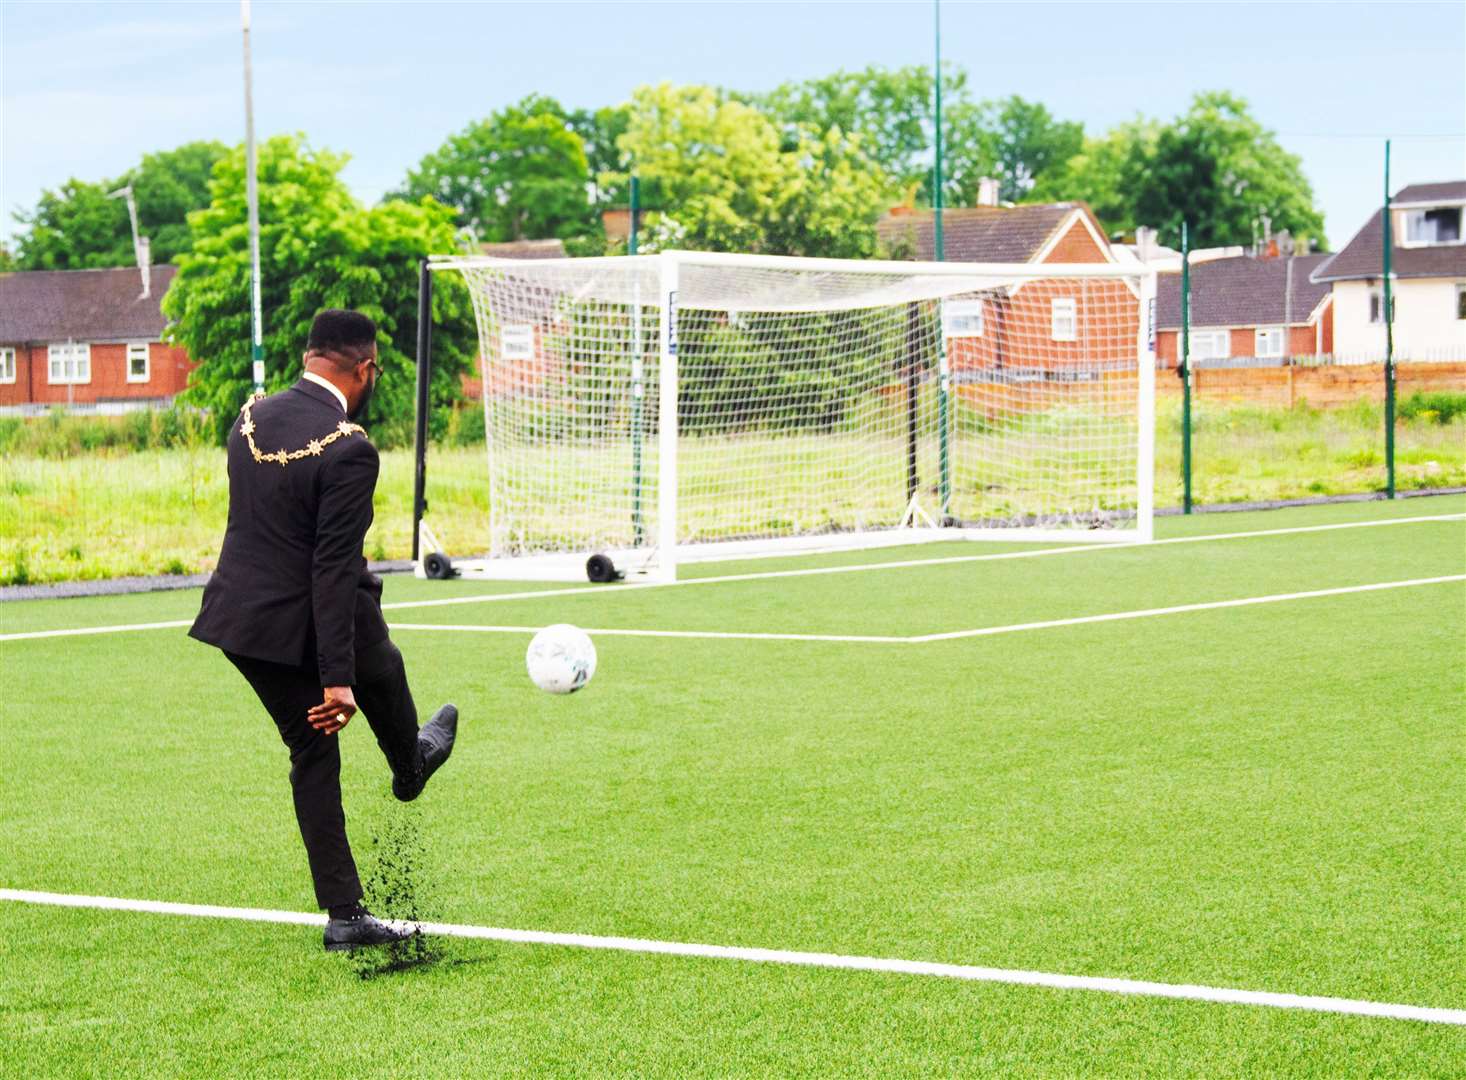 New Mayor of Gravesham Cllr Daniel Adewale King tested out the 3G pitch. Picture: Courtney Charlton